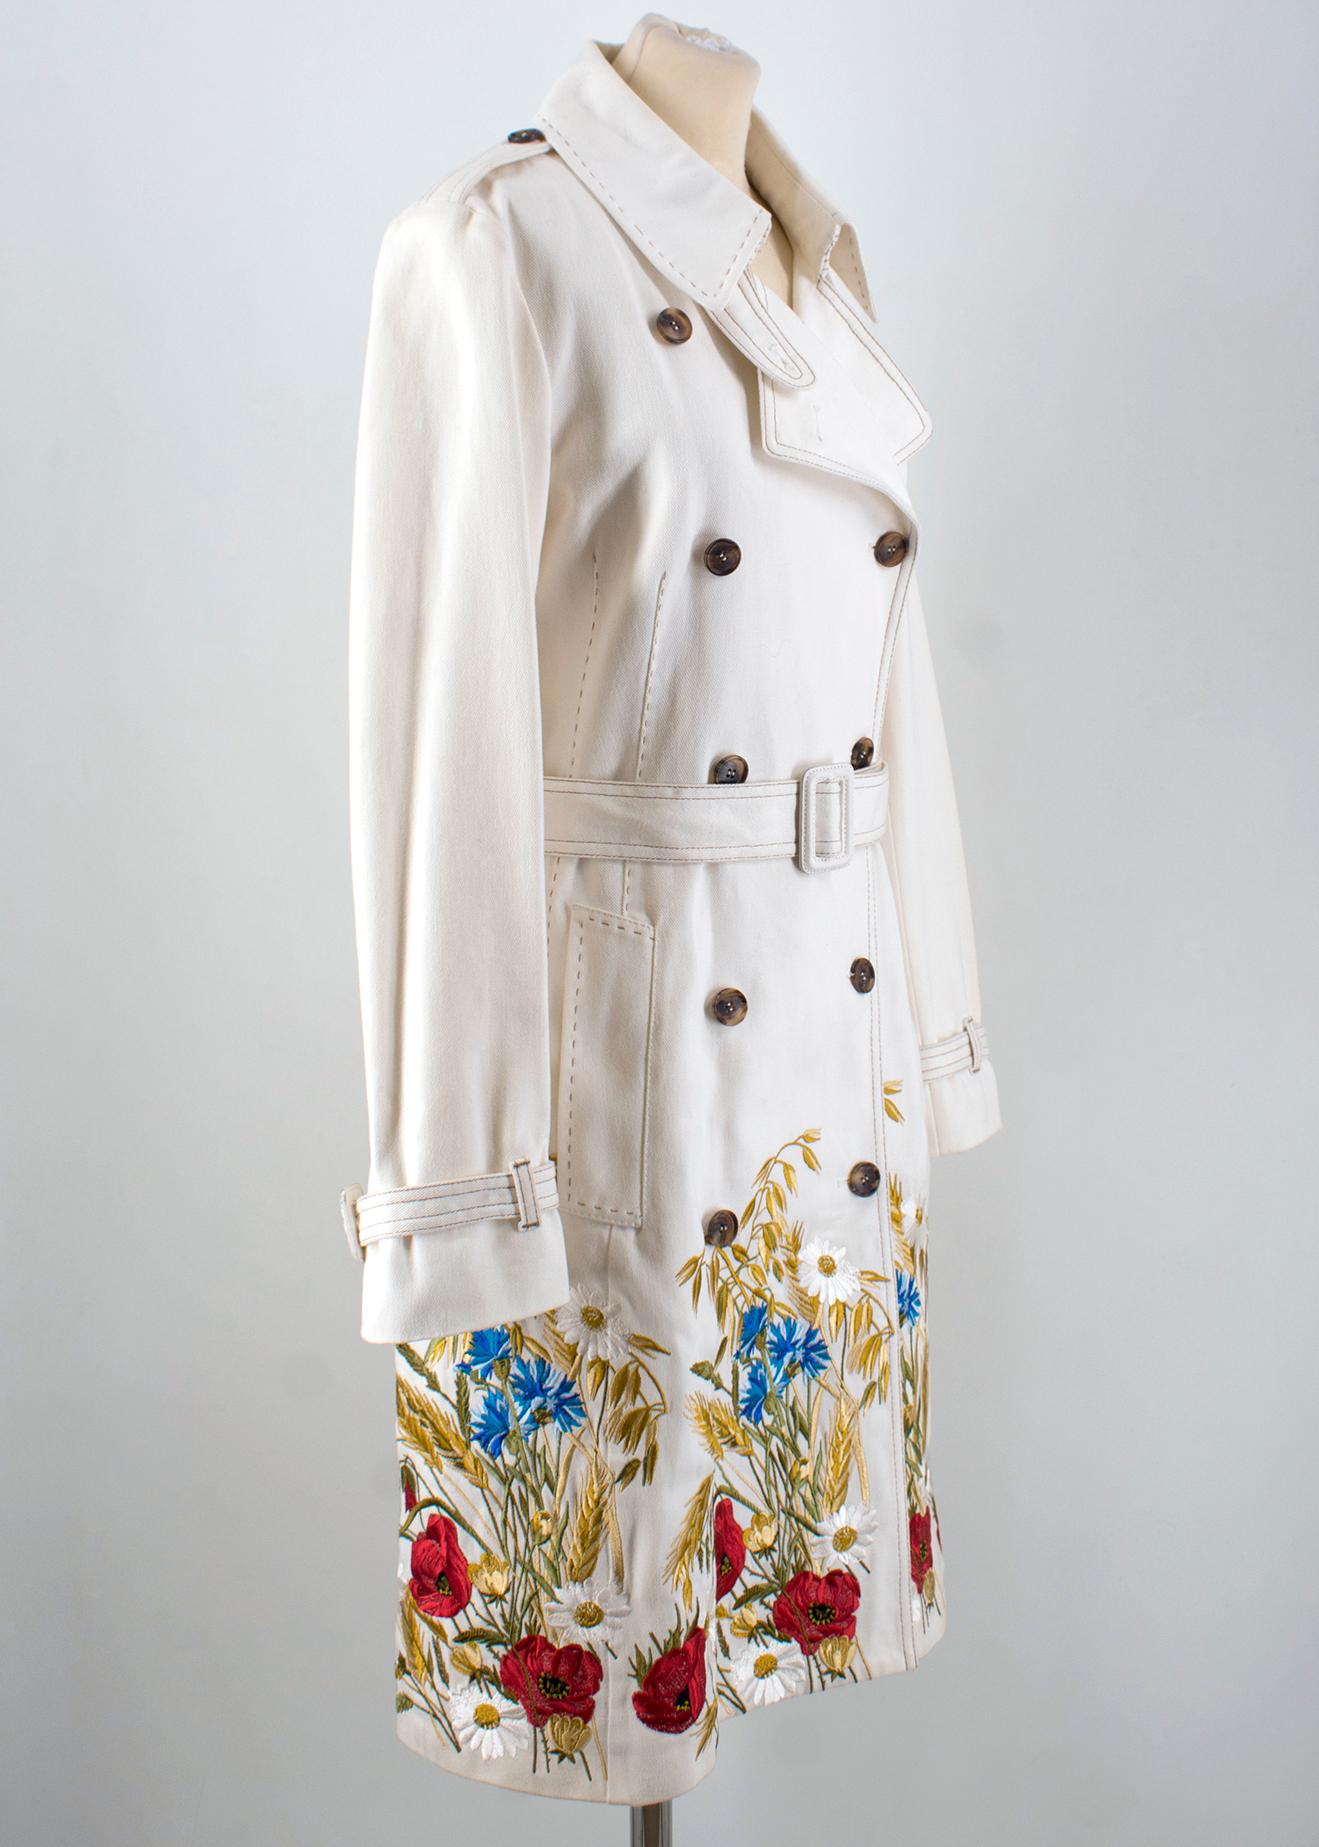 Alexander McQueen Cream Long Denim Trench
- Long belted trench coat in a cream denim material
- With multicoloured floral applique along the bottom of the coat
- Contrast stitching 
- Tortoise shell buttons 

Condition: 9.5/10

Please note, these